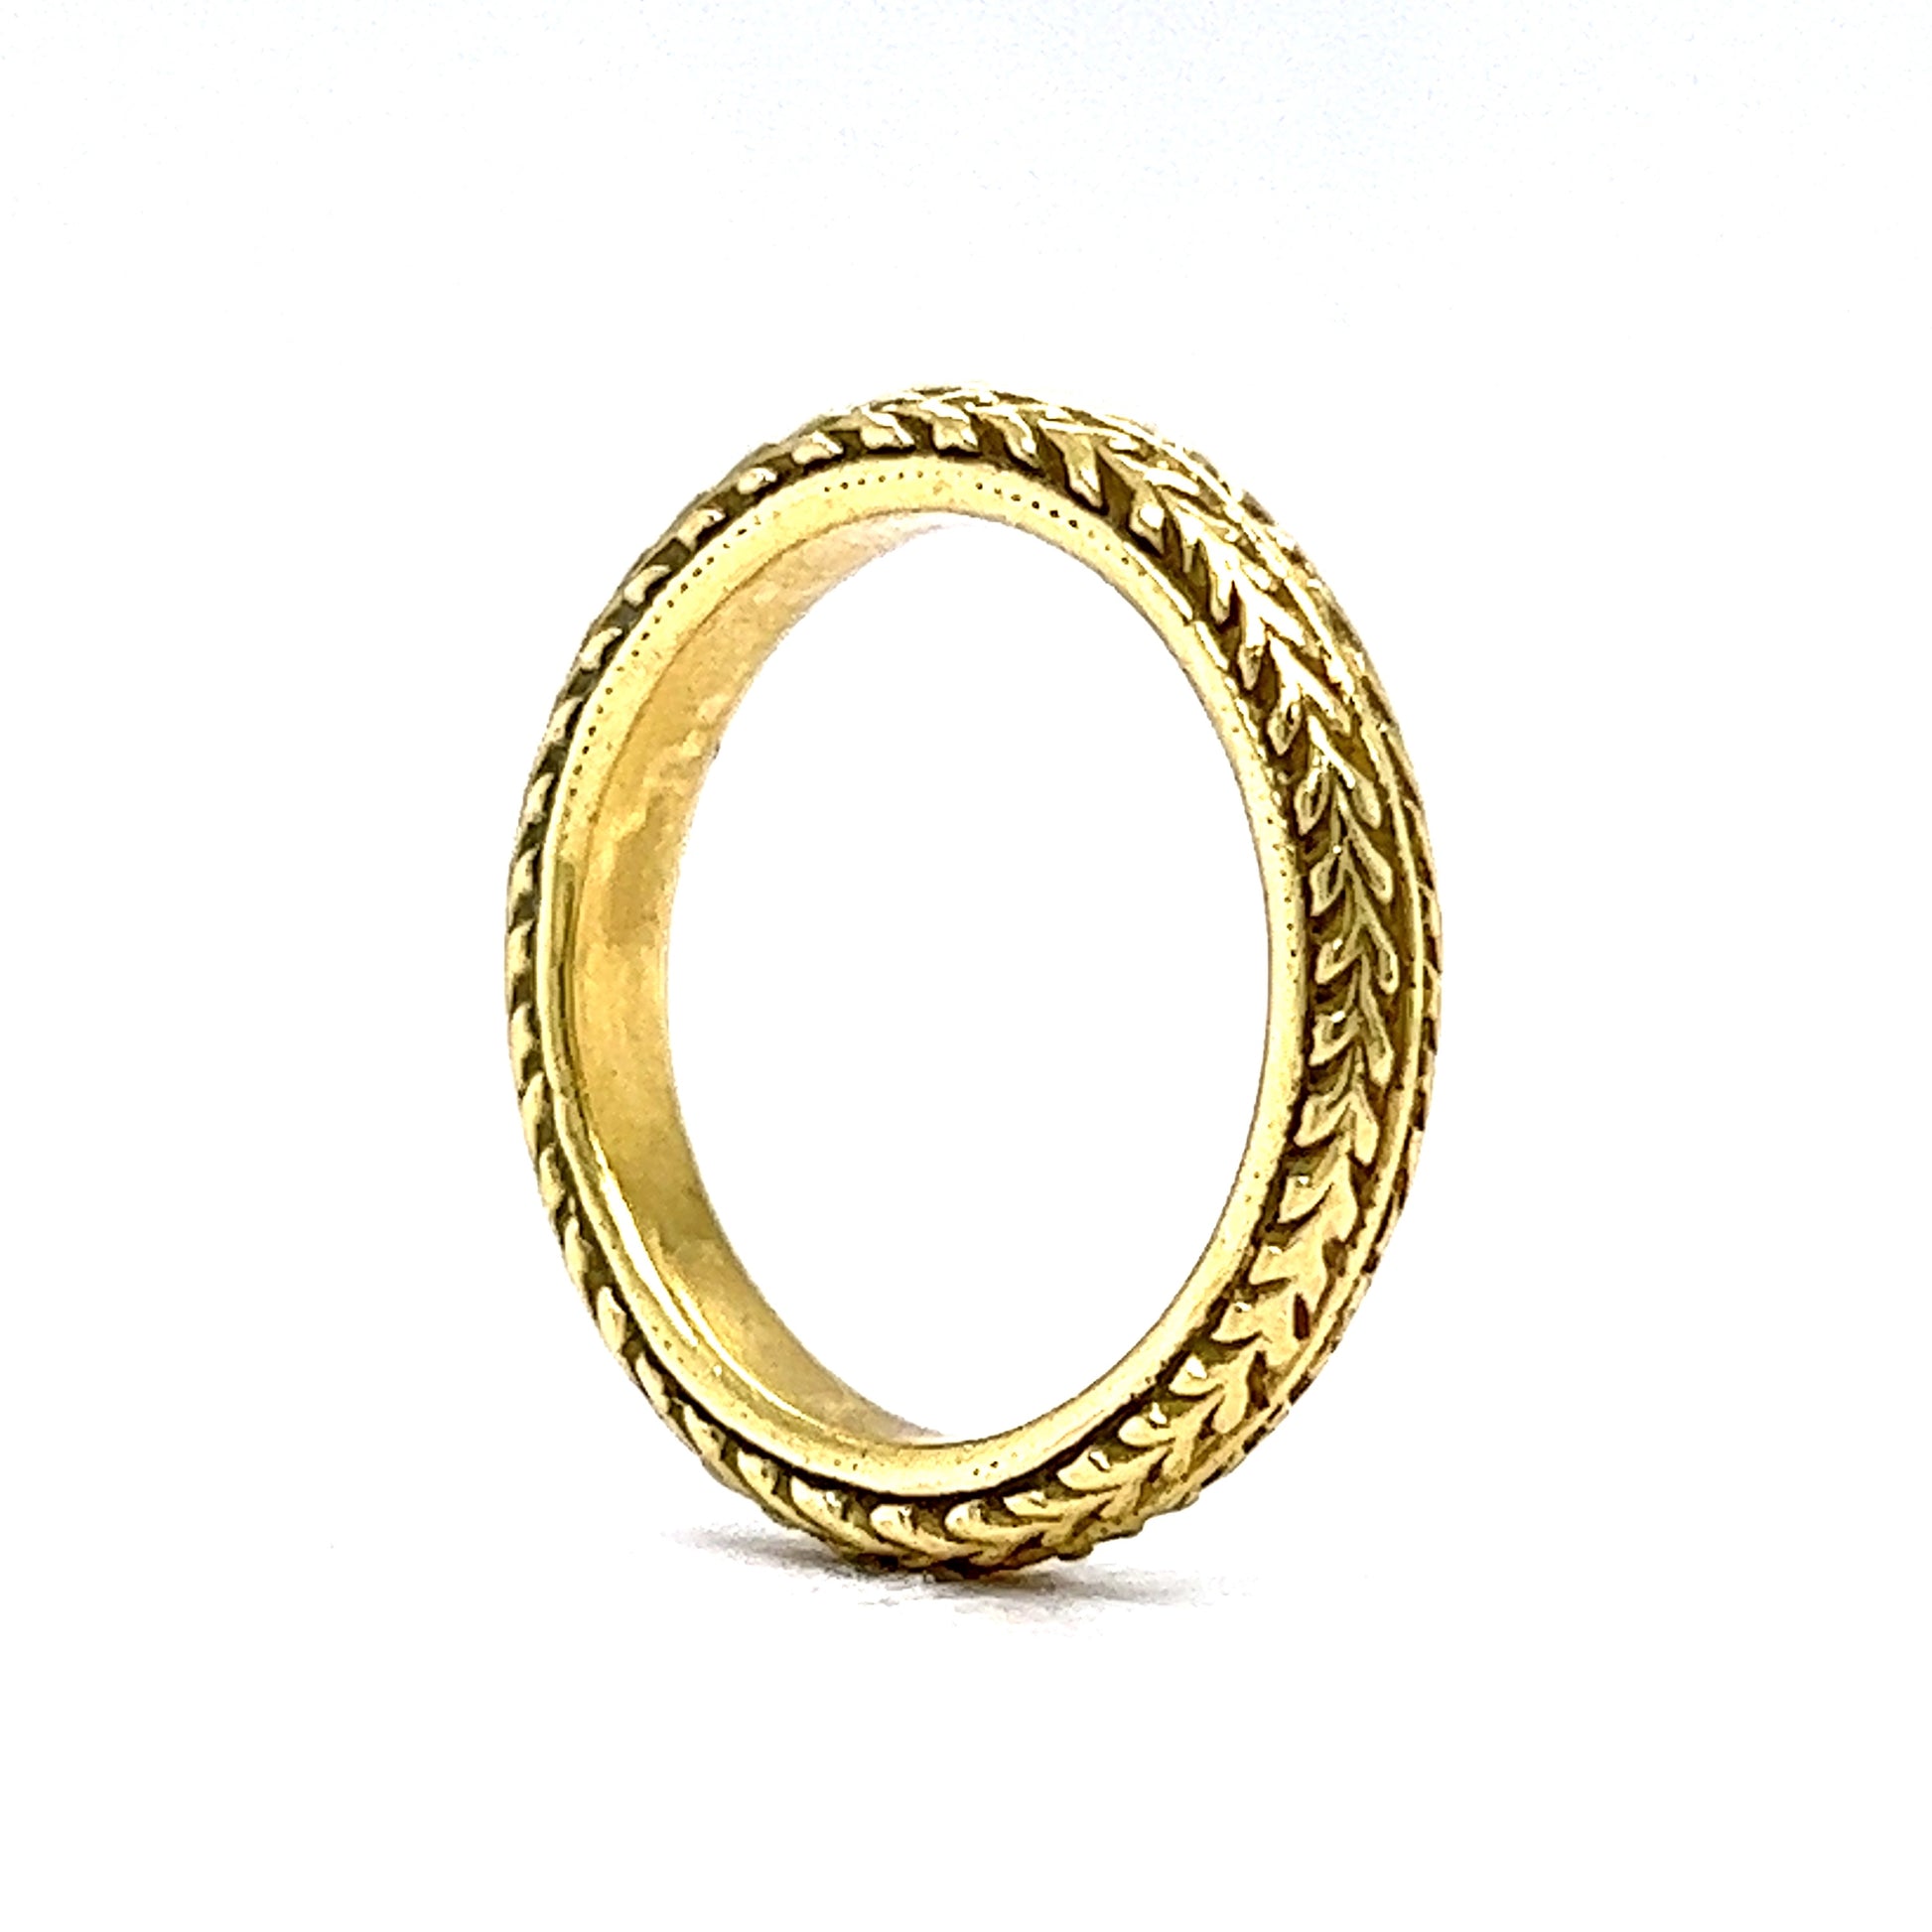 Engraved Double Chevron Pattern Wedding Band in 18k Yellow GoldComposition: 18 Karat Yellow Gold Ring Size: 5.0 Total Gram Weight: 5.0 g Inscription: 18k Dilon
      